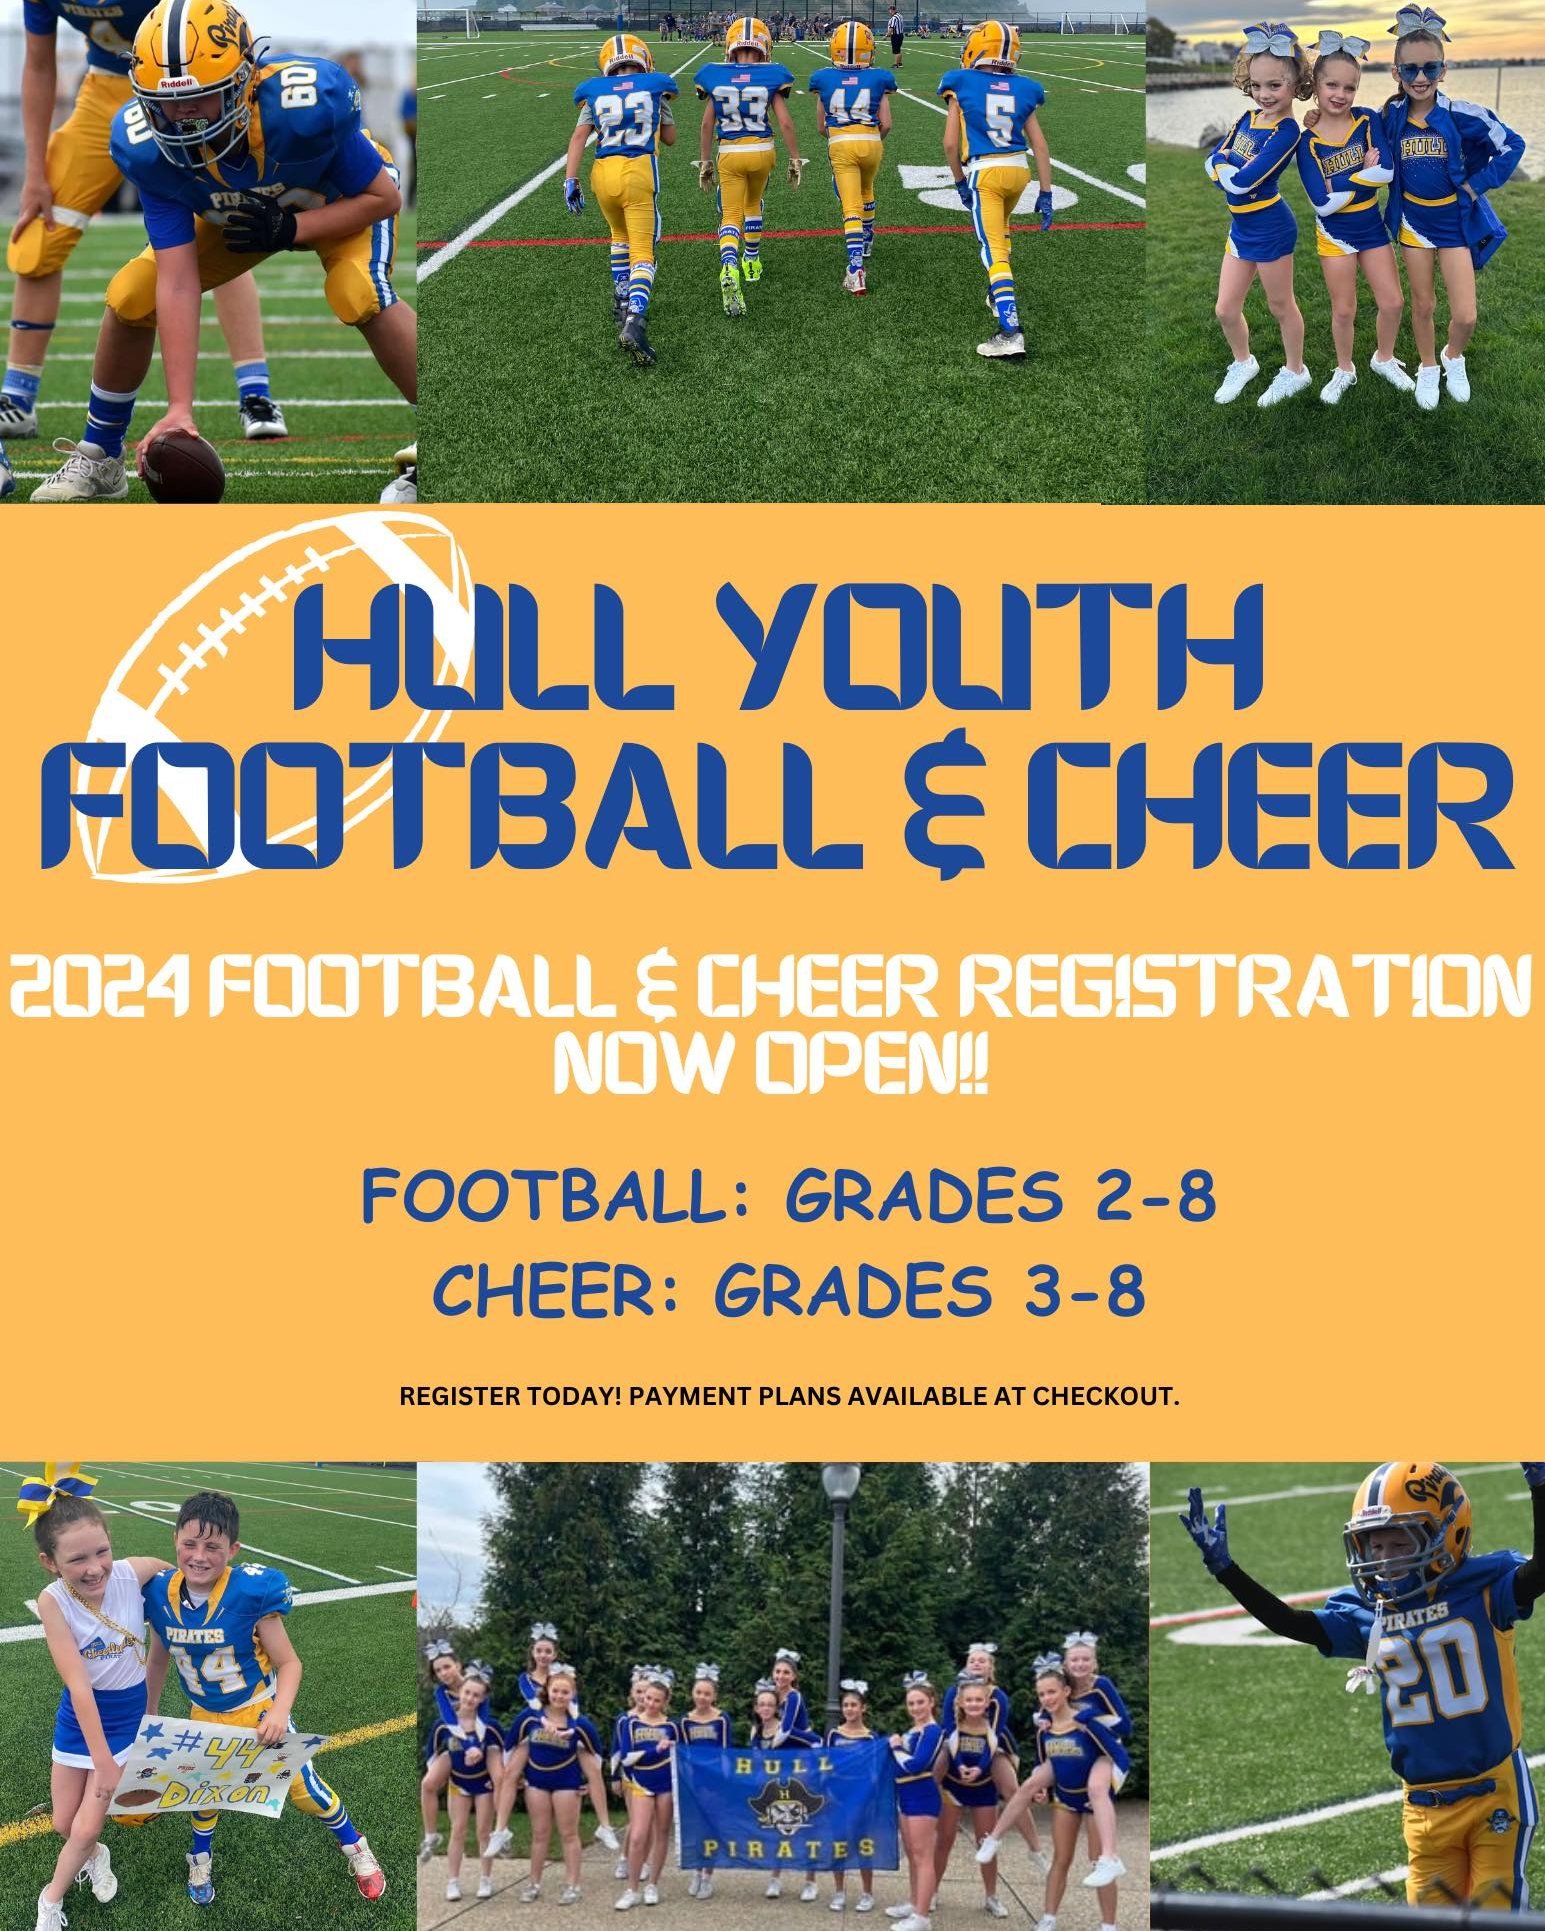 Registration for Hull Youth Football and Cheer squads is now open! Visit https://clubs.bluesombrero.com/HullYouth for all the details! #hullma #hullmanews #nantasket #MALocalNews #hulltimes #southshorenews